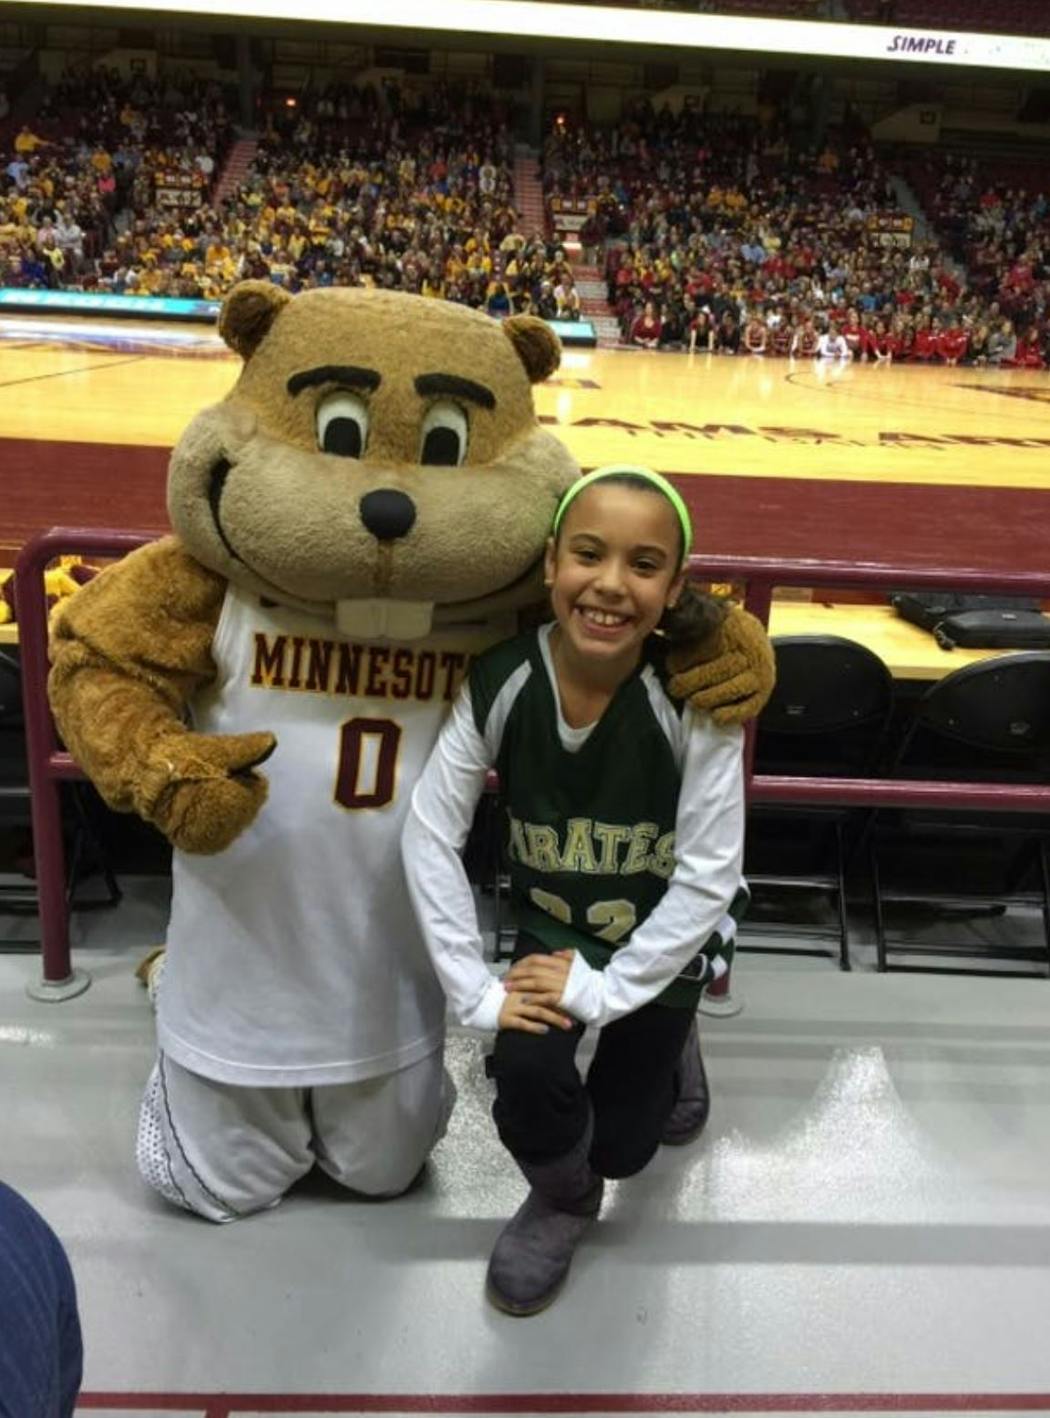 Kennedy Klick in her younger years, with a friend she’ll get to know much better now that she’s committed to the Gophers